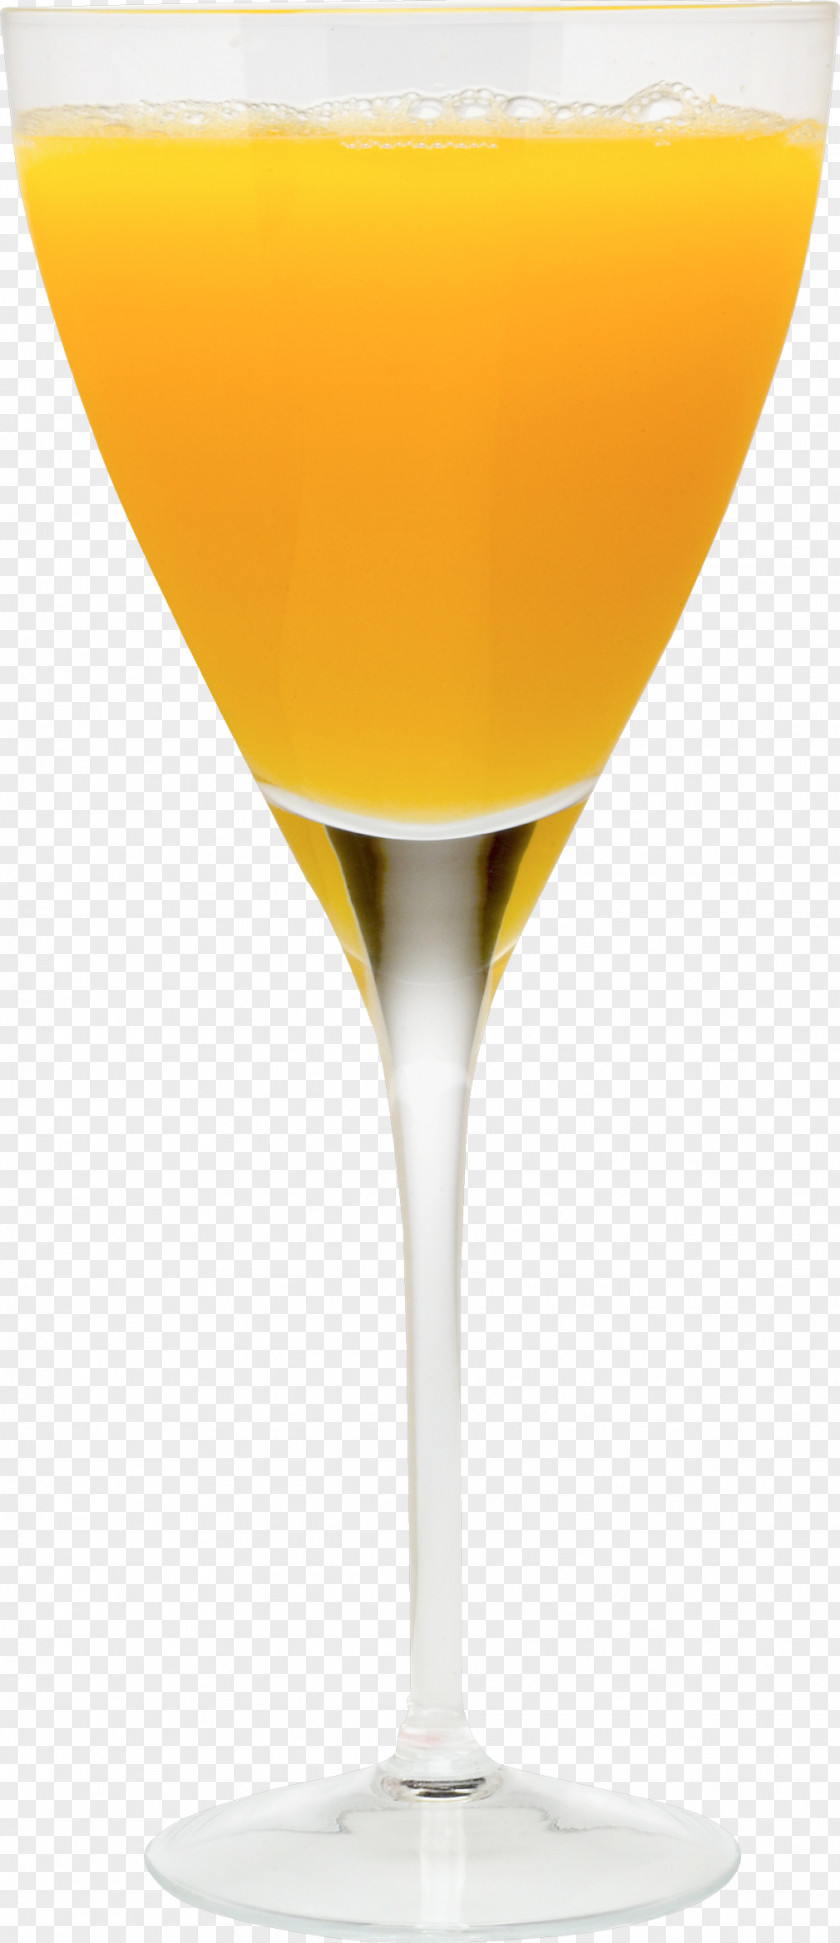 Juice Orange Cocktail Non-alcoholic Drink Fizzy Drinks PNG